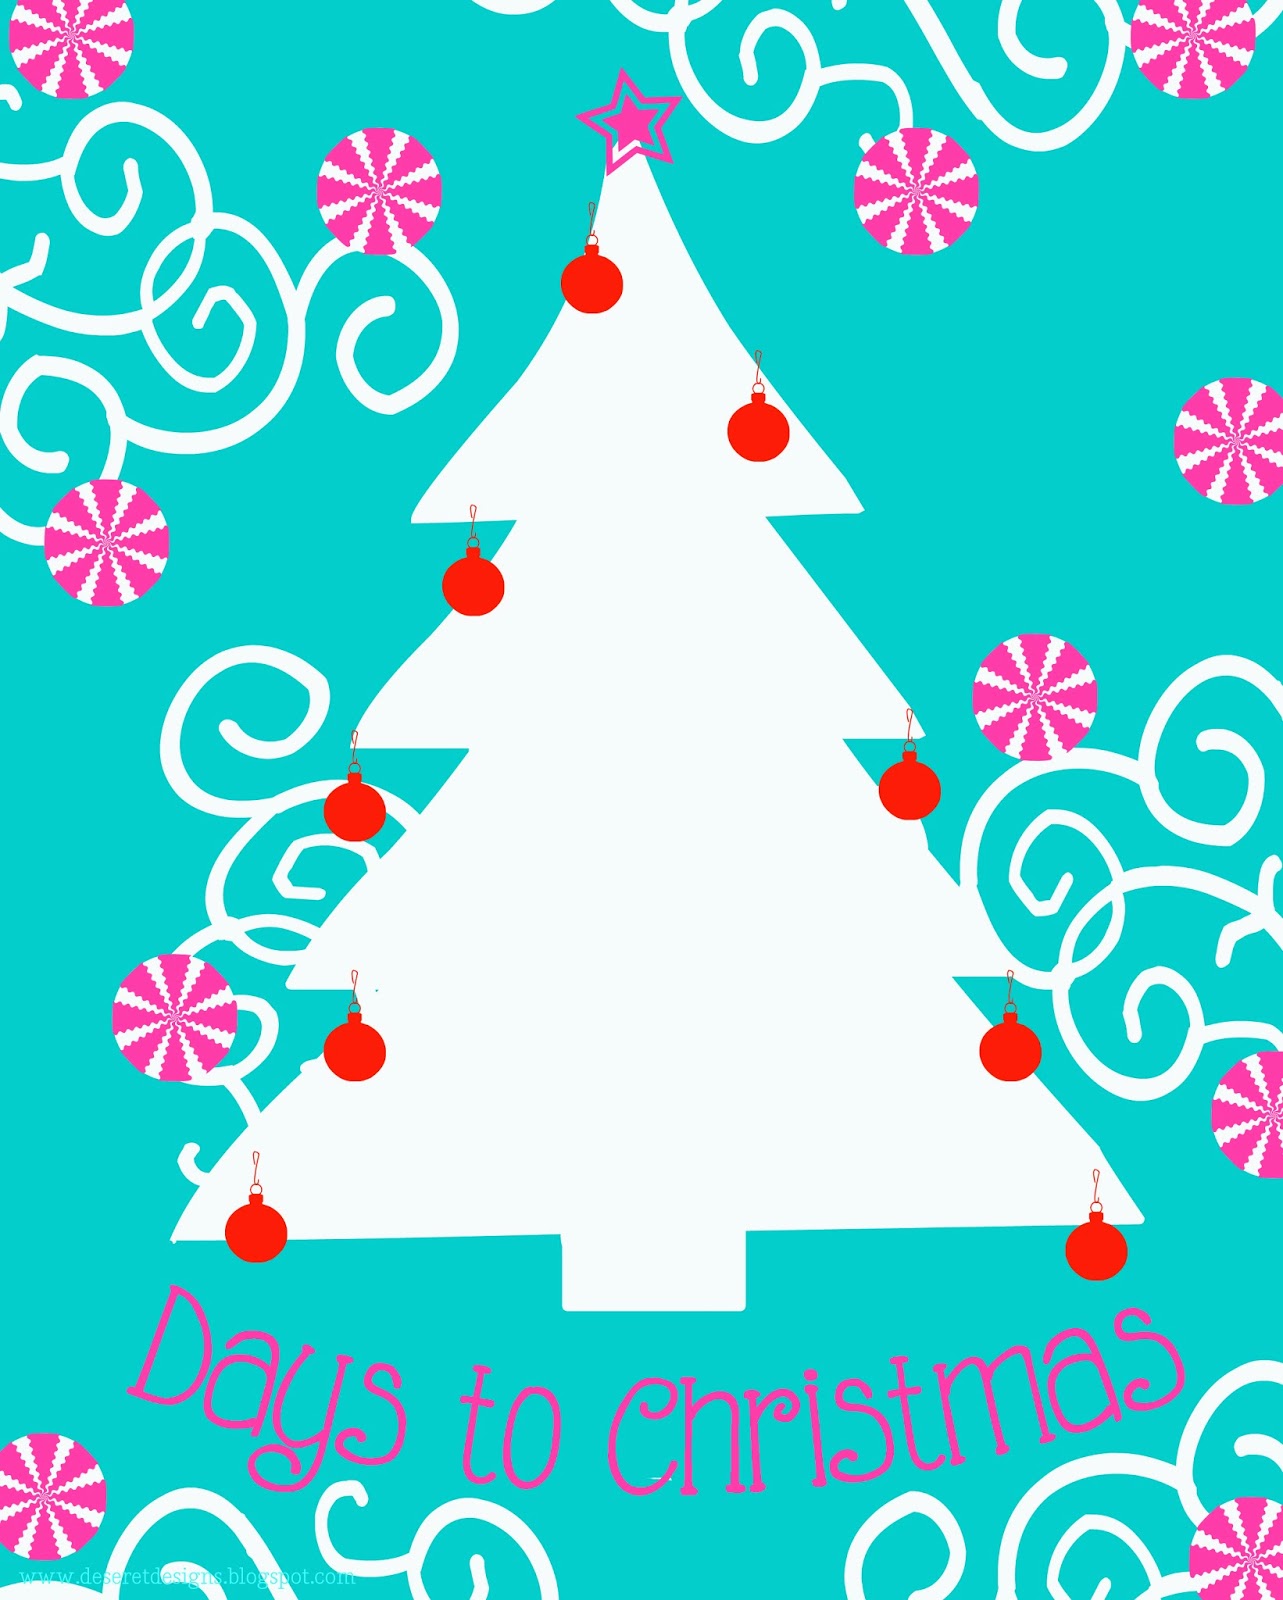 Deseret Designs: Days to Christmas {Free Countdown Printables}